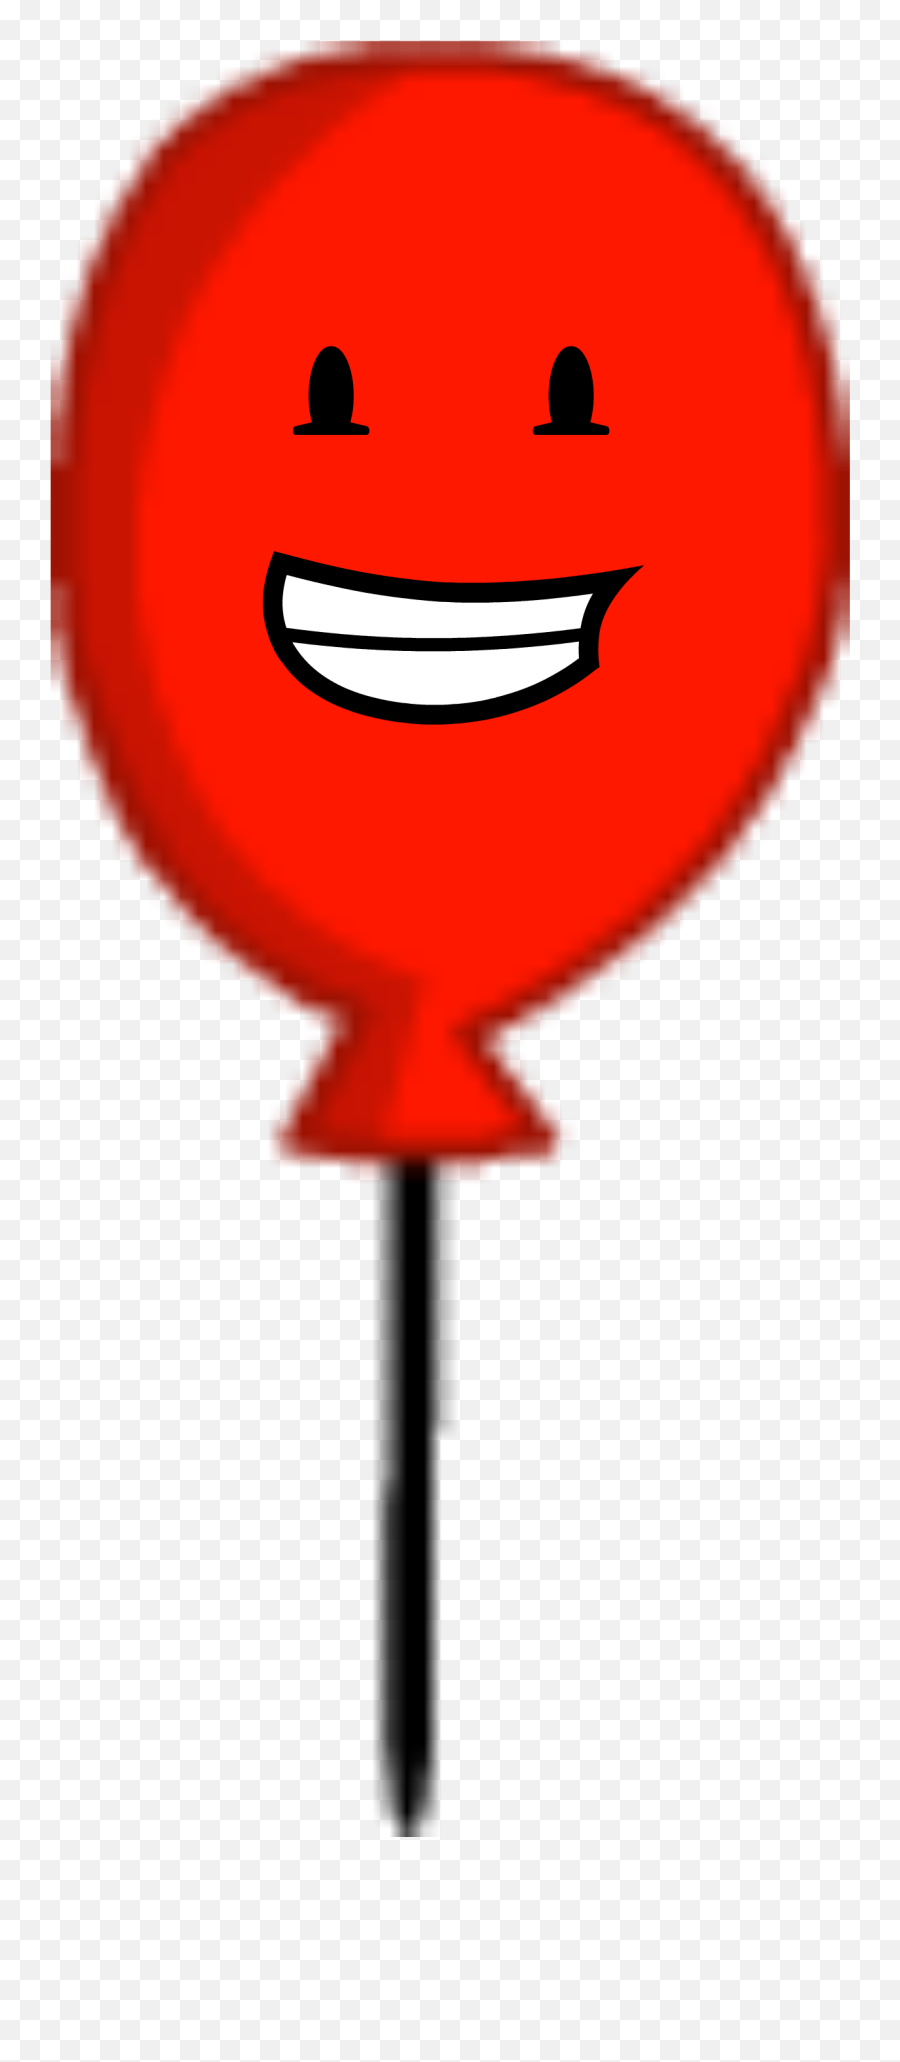 Red Balloons Png - Bfdi Red Balloon 2736494 Vippng Bfdi Red Balloon,Red Balloons Png